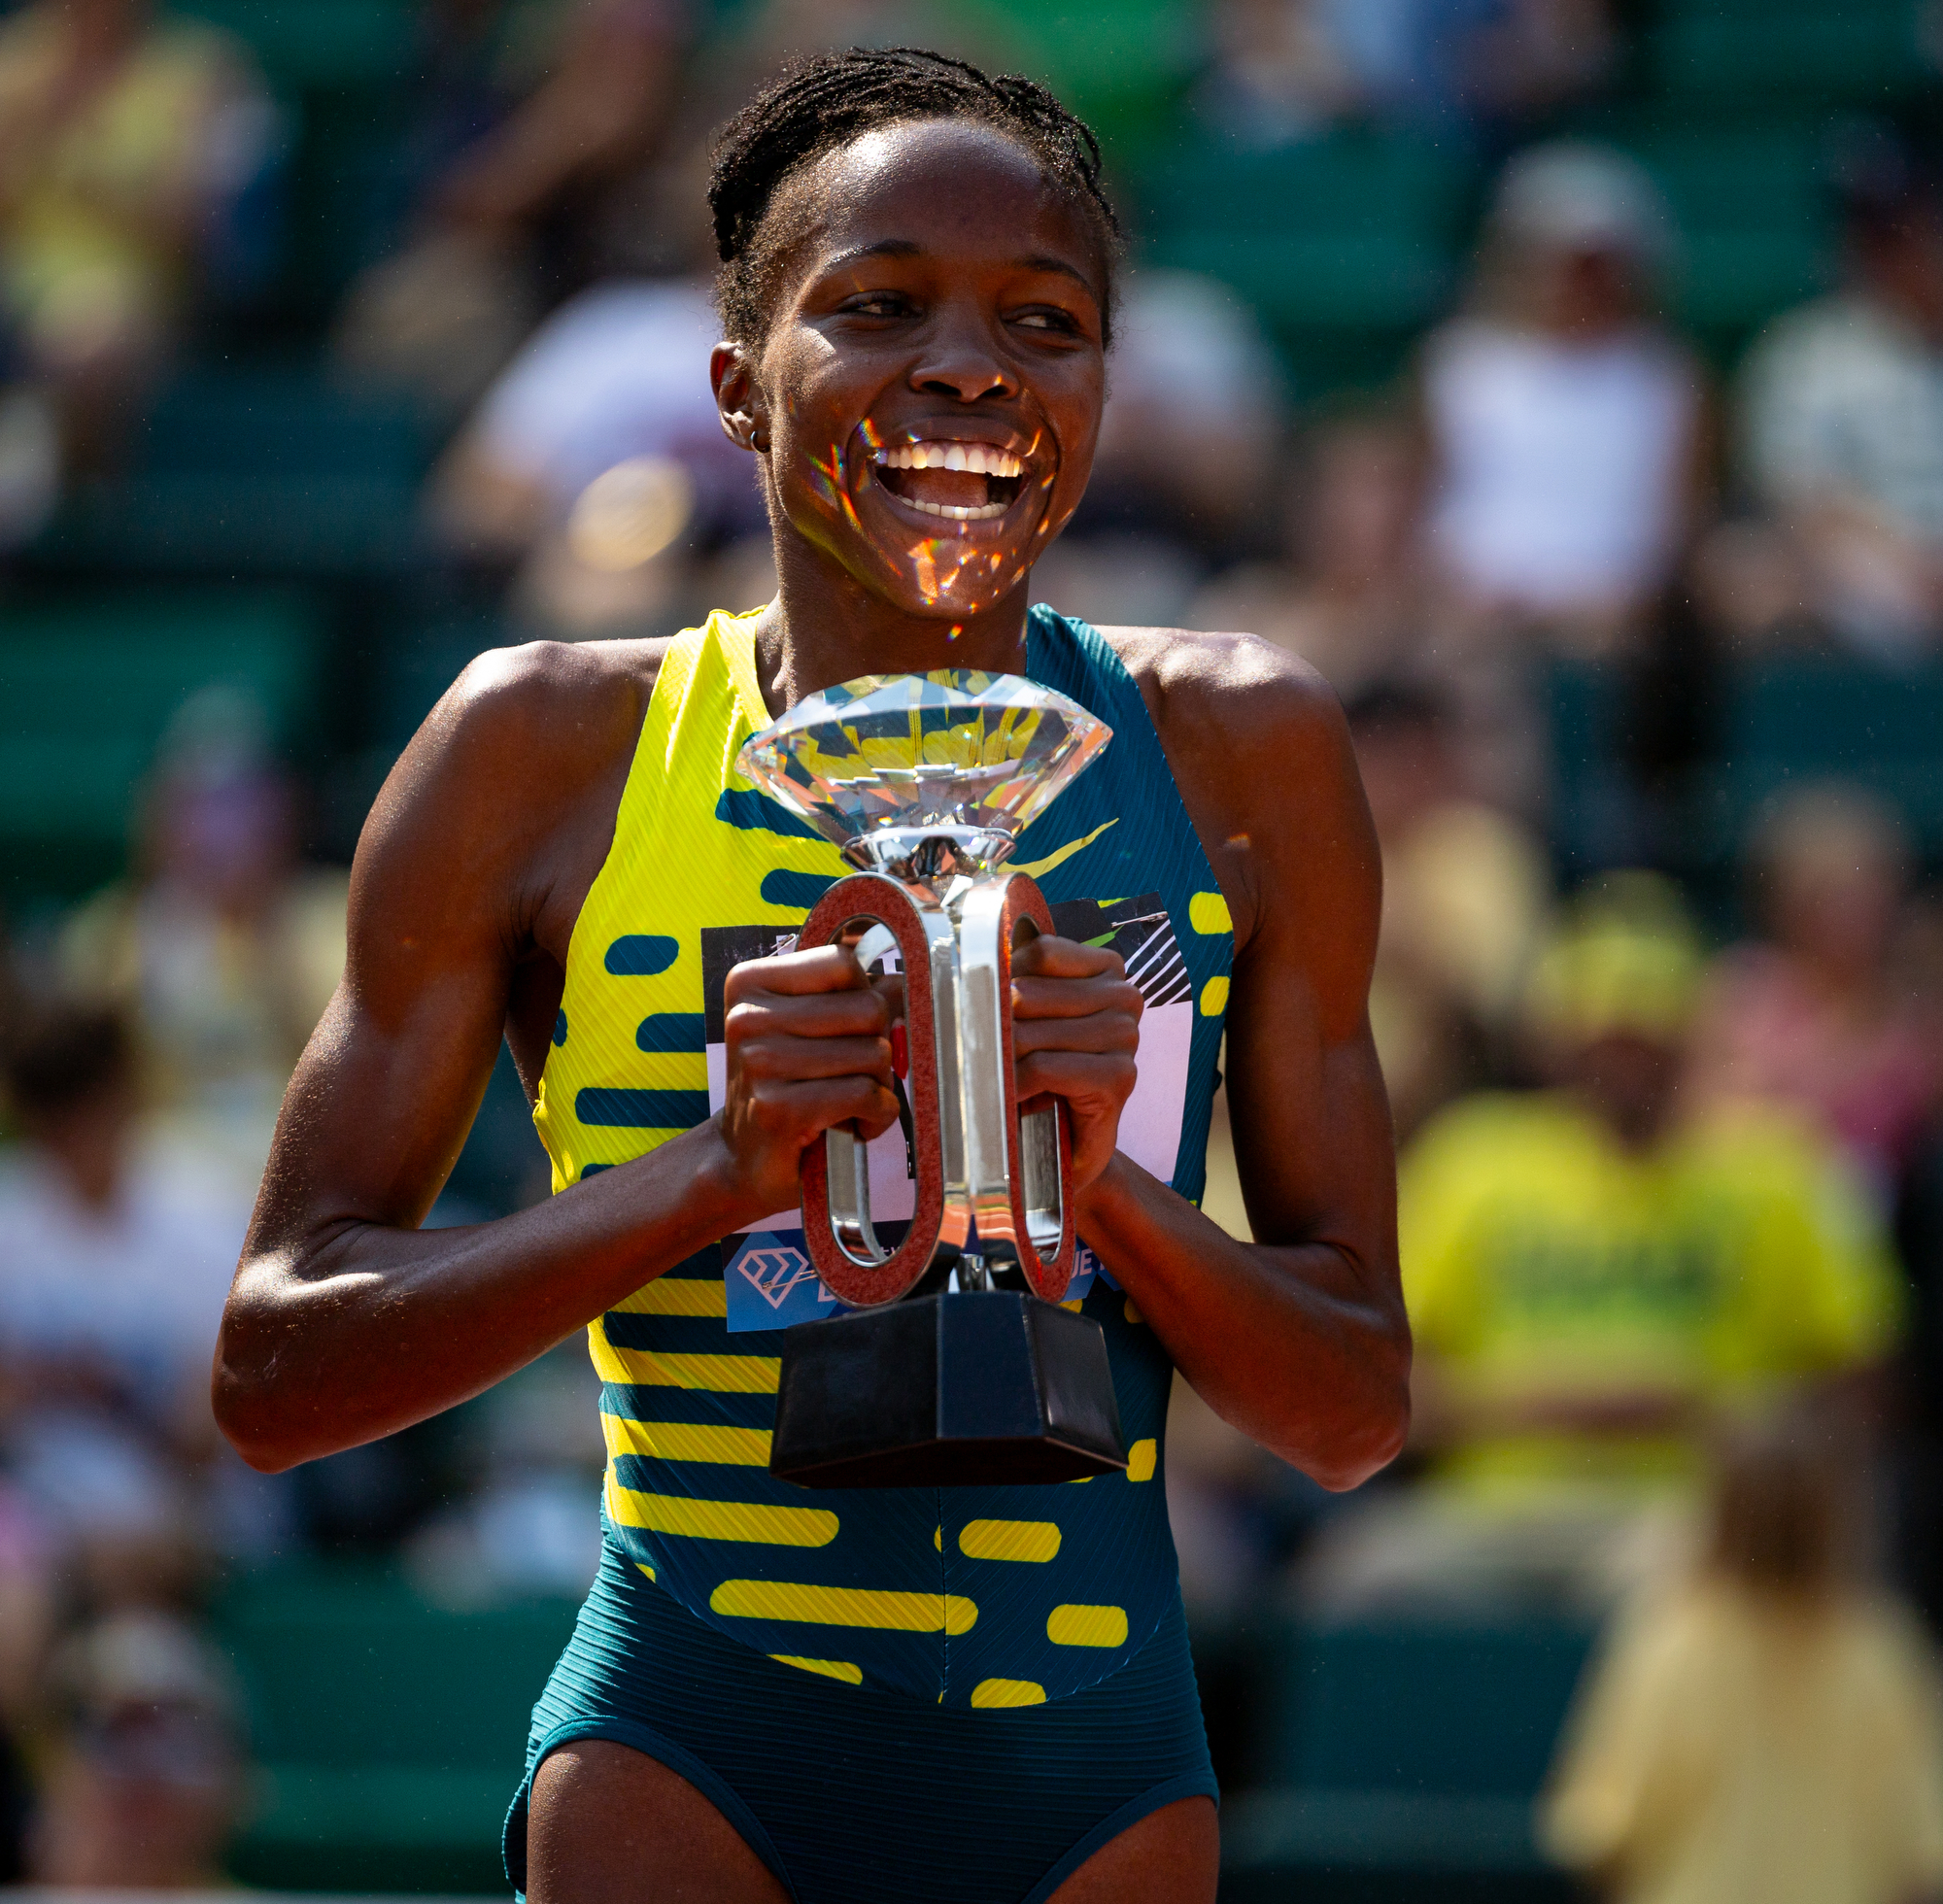 Winfred Mutile Yavi of Bahrain celebrates with the Diamond League trophy after winning the women's steeplechase at the Prefontaine Classic track and field meet on Saturday, Sept. 16, 2023, at Hayward Field in Eugene.